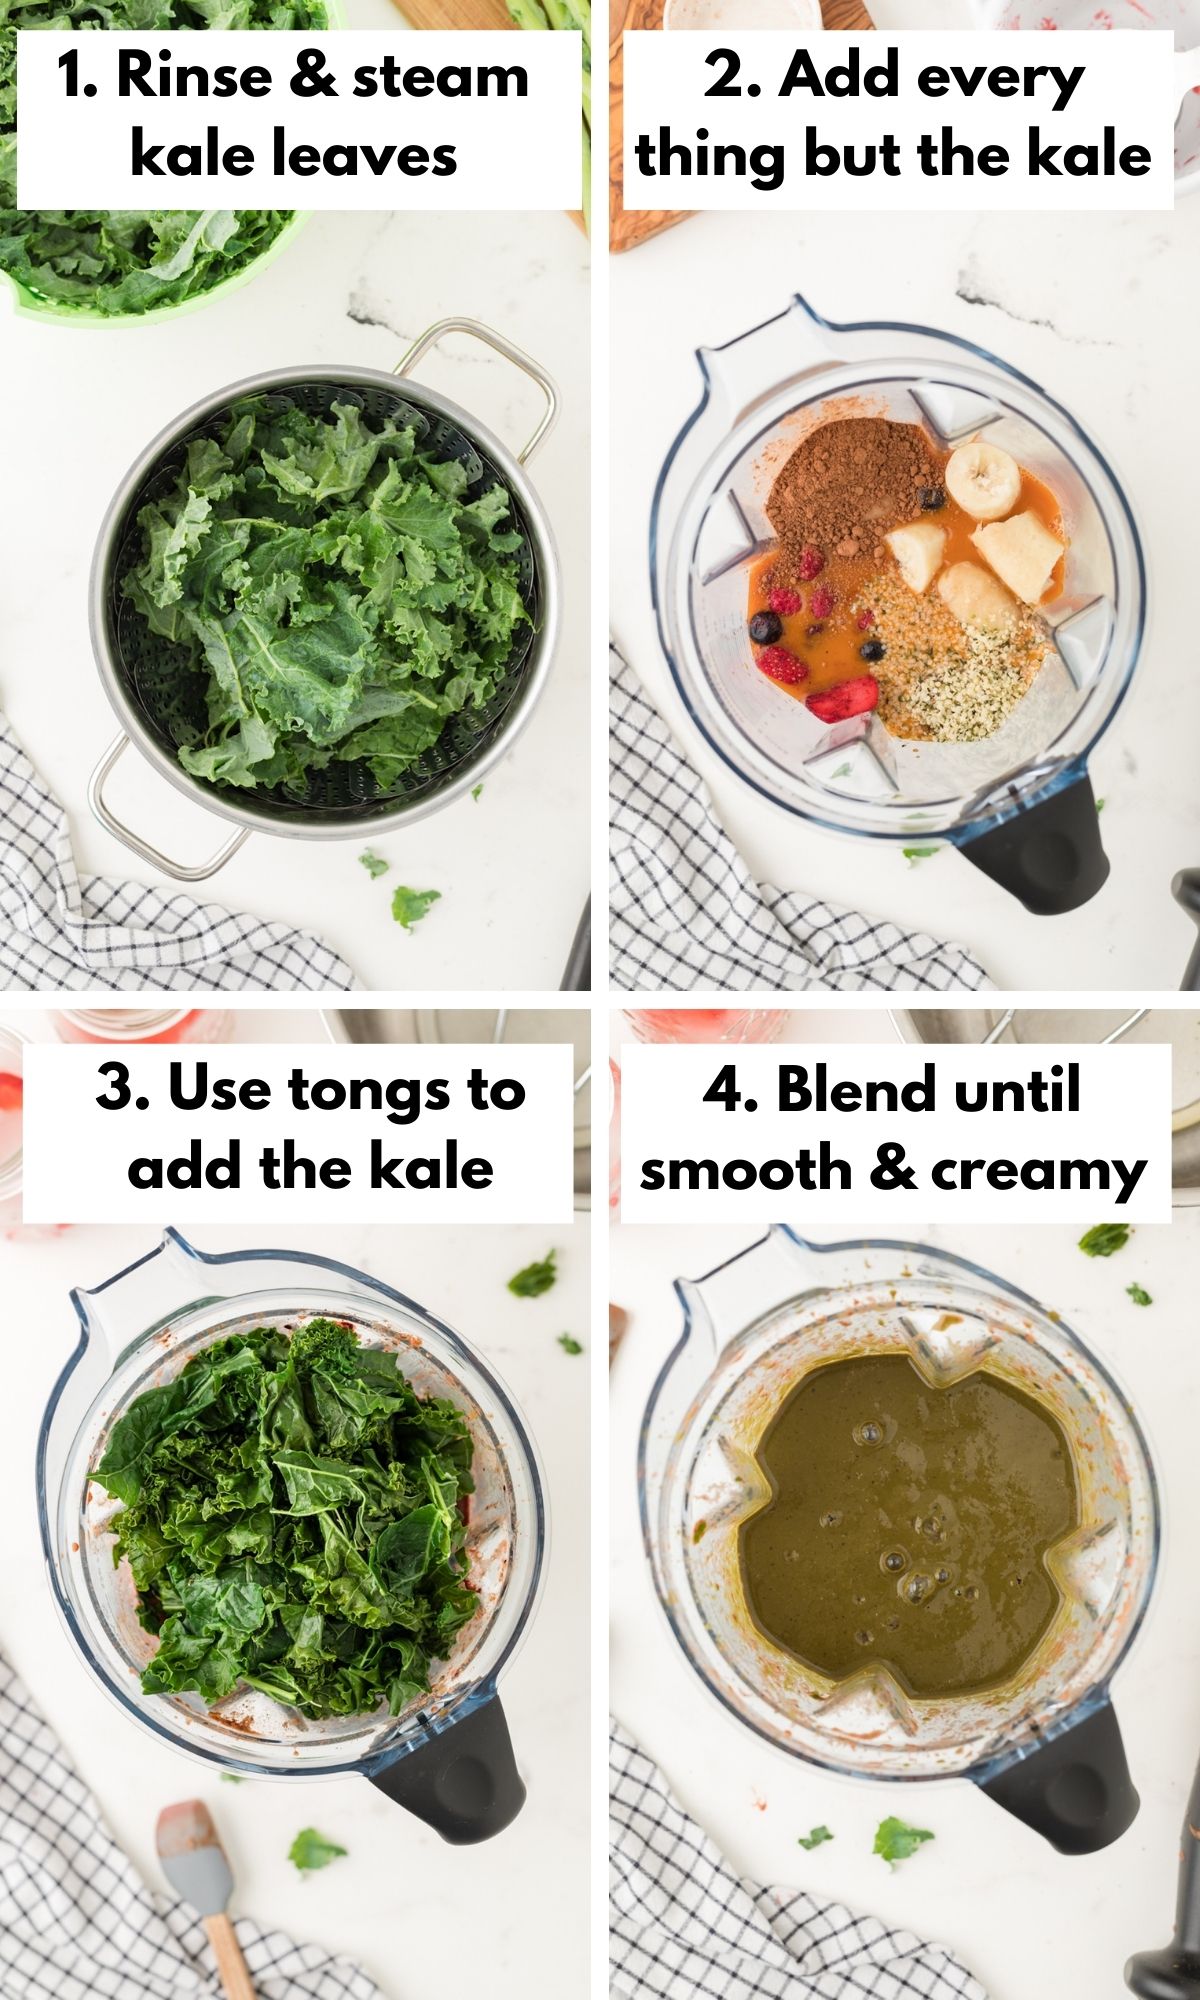 How to make a chocolate kale smoothie.